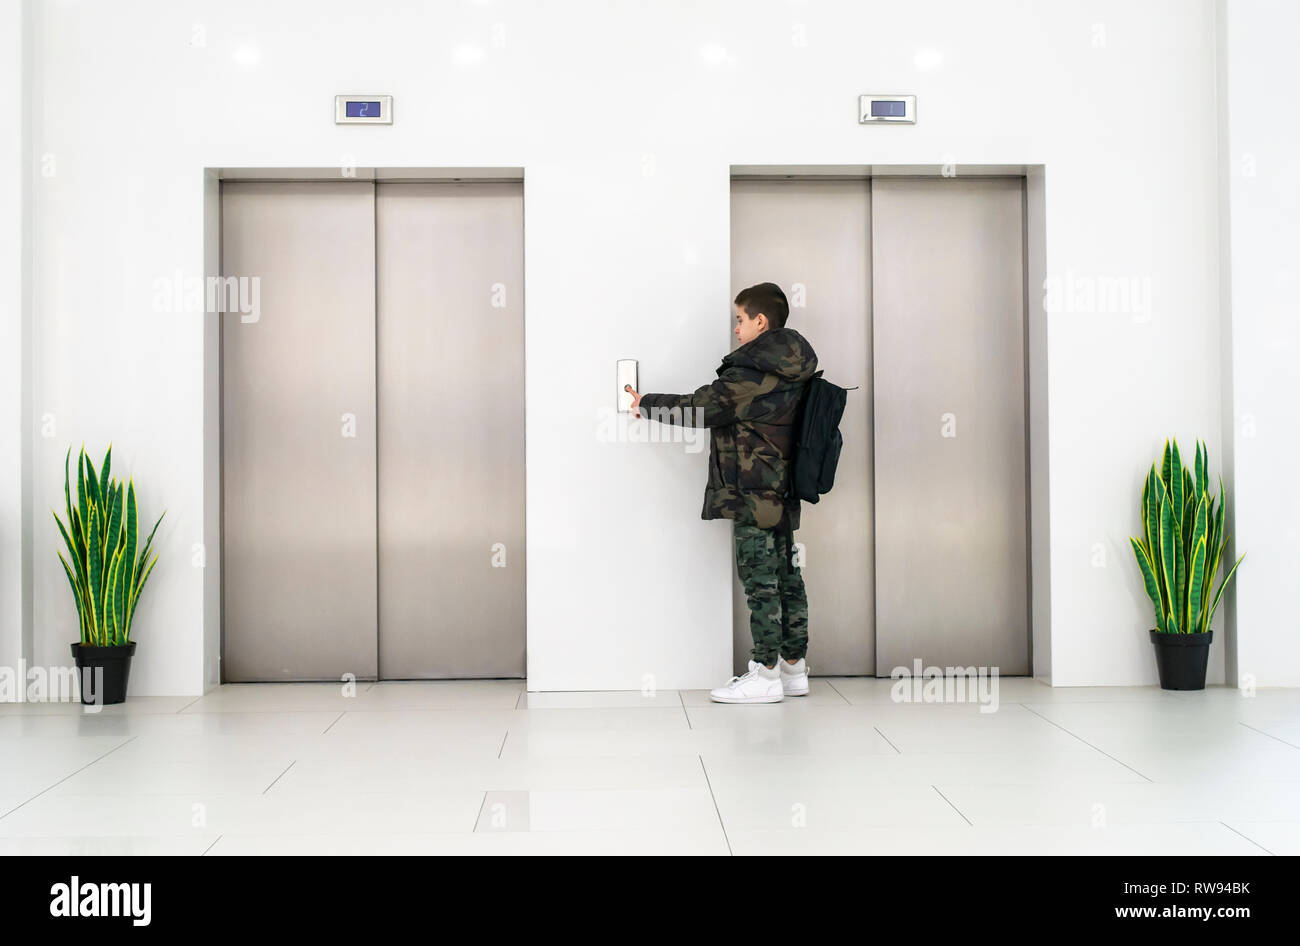 Boy with casual clothes and white sneakers call the elevator. White contemporary building interior. Flowers in pots and white wall. Metallic elevator  Stock Photo